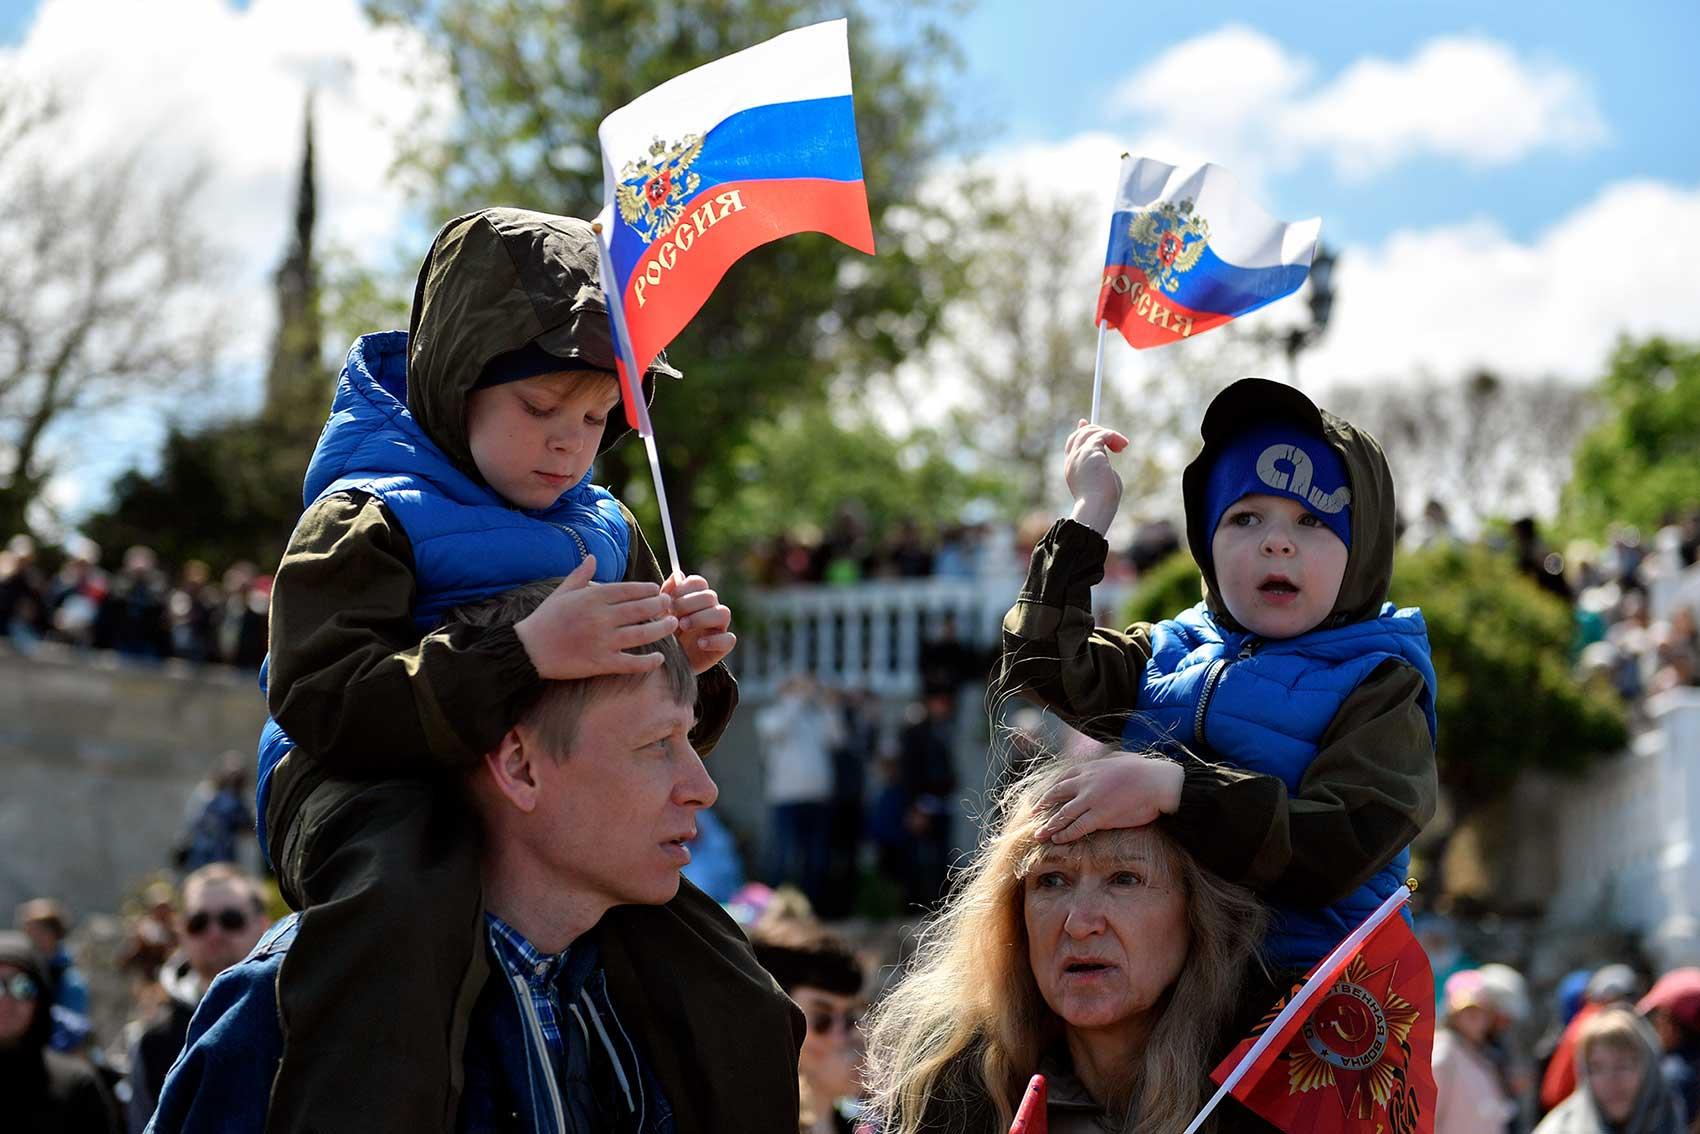 Two children, riding on adults' shoulders, wave Russian flags